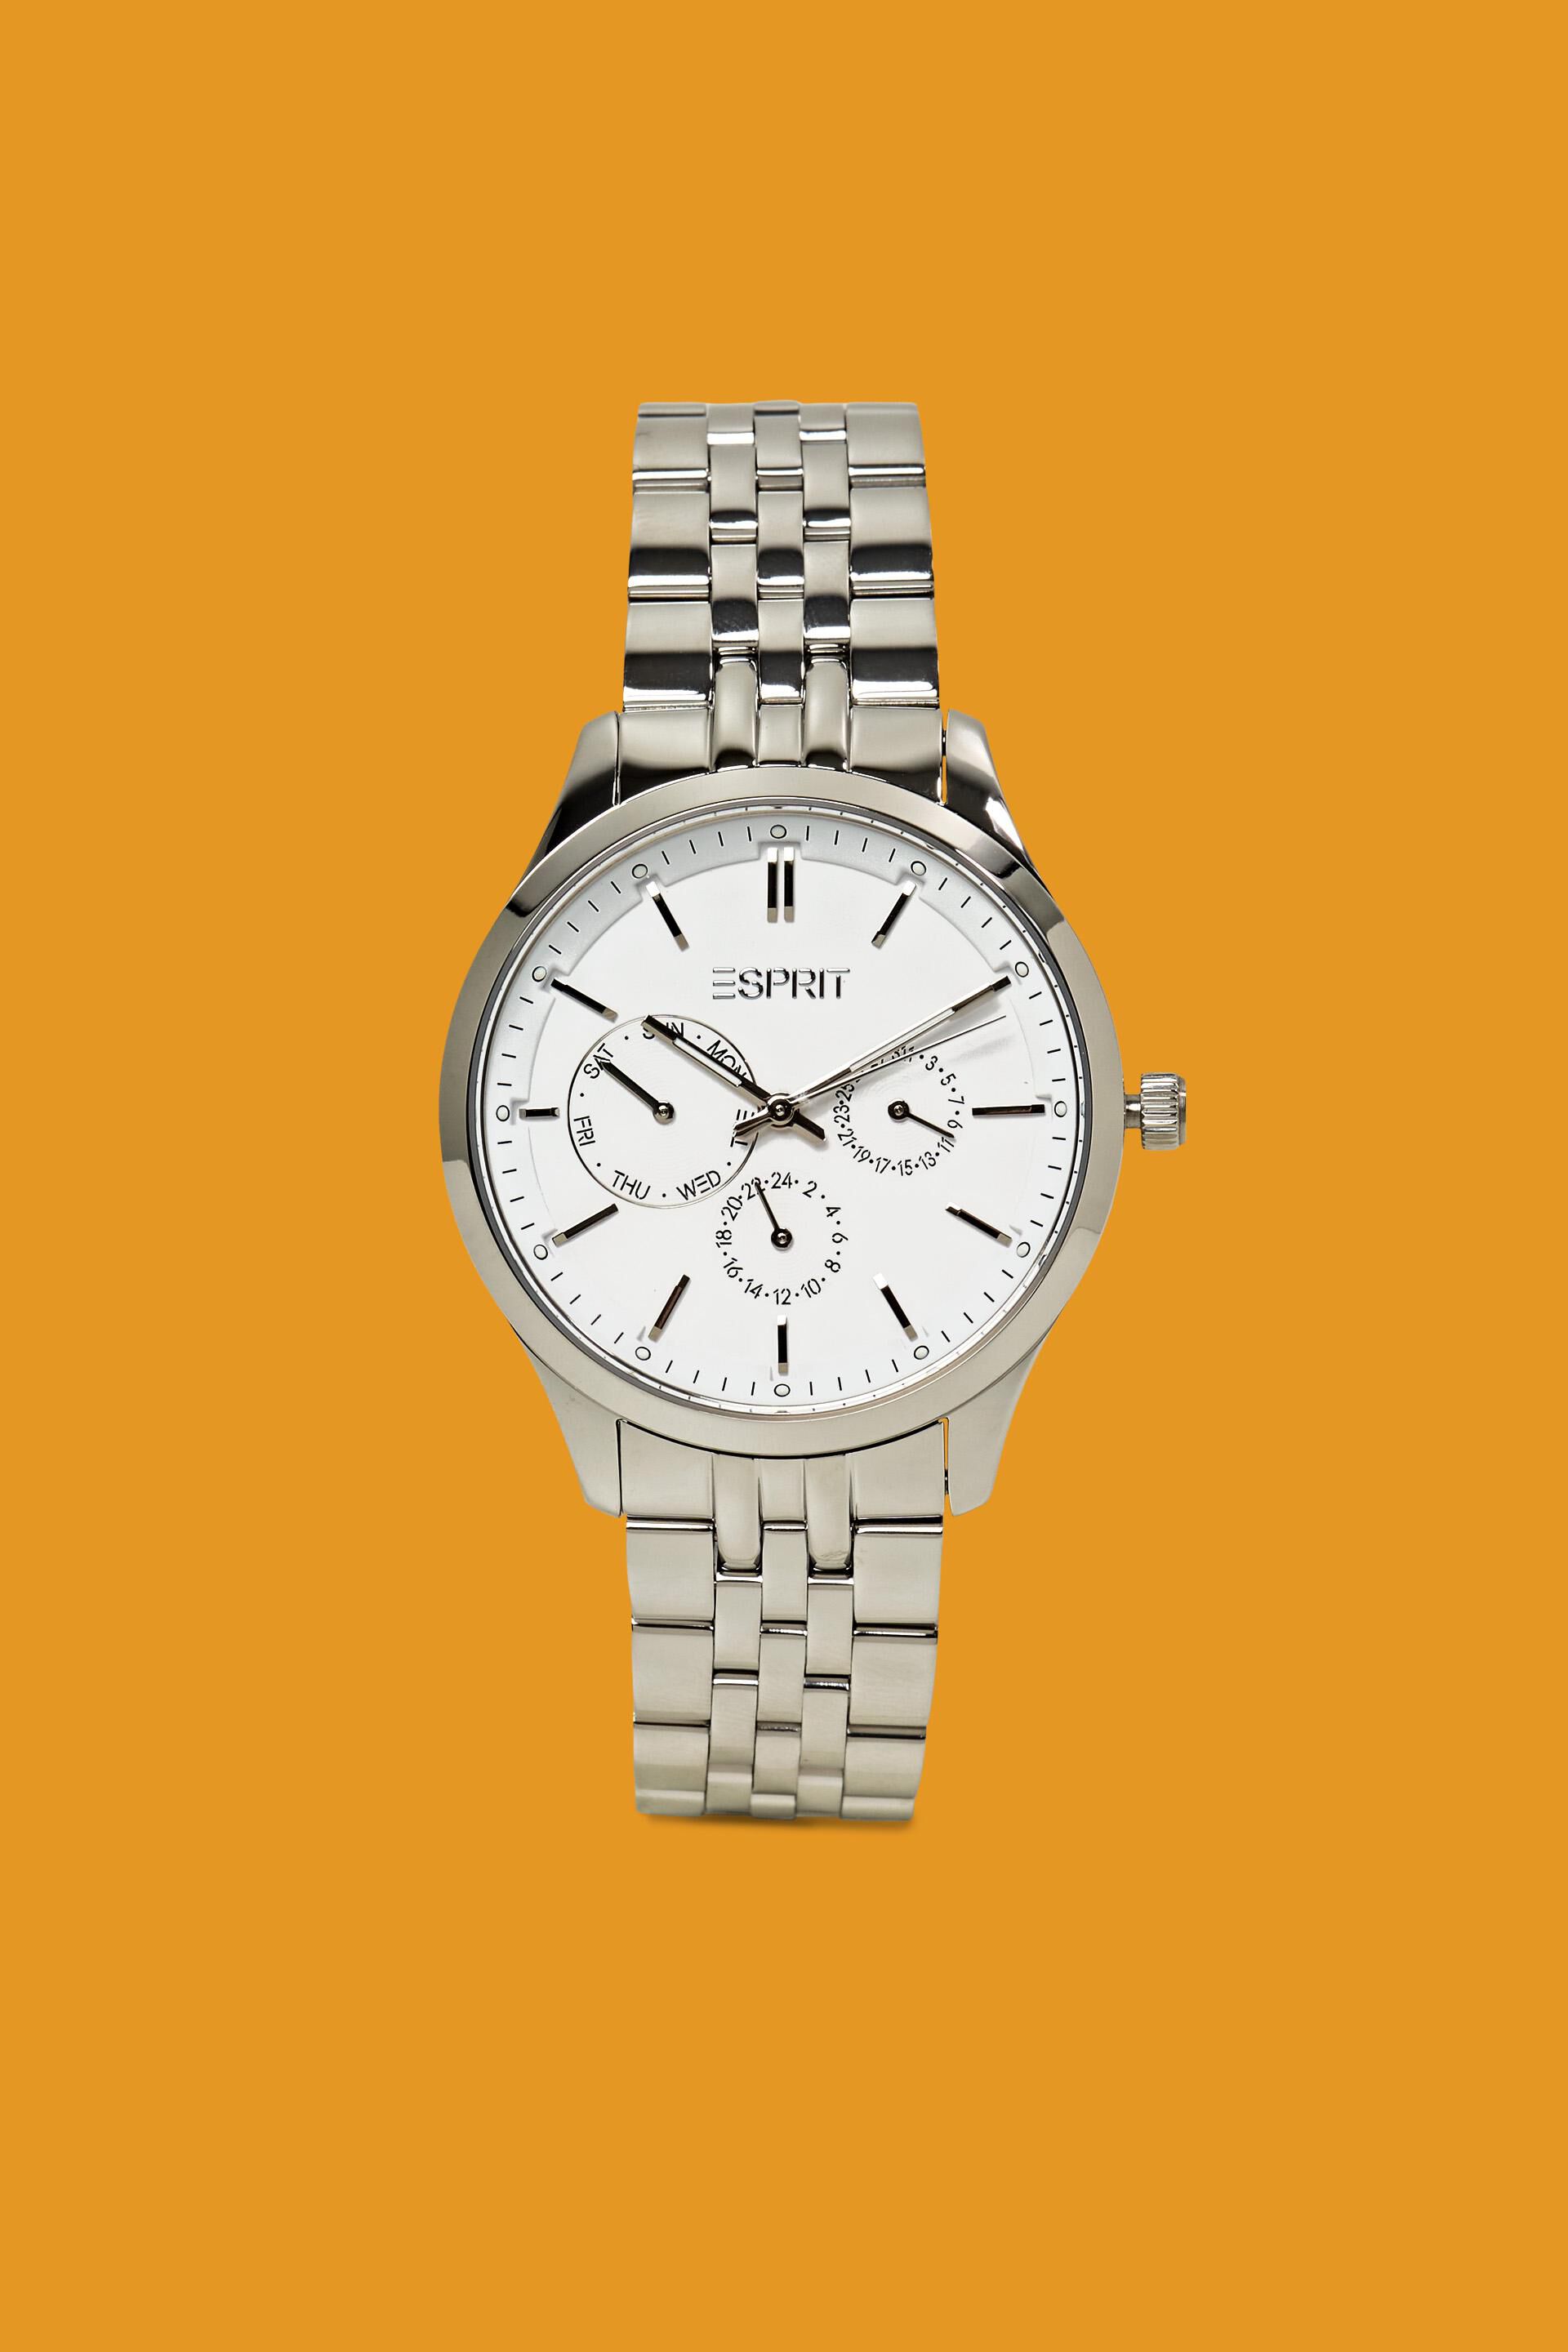 Esprit Online Store Multi-functional watch with a bracelet link